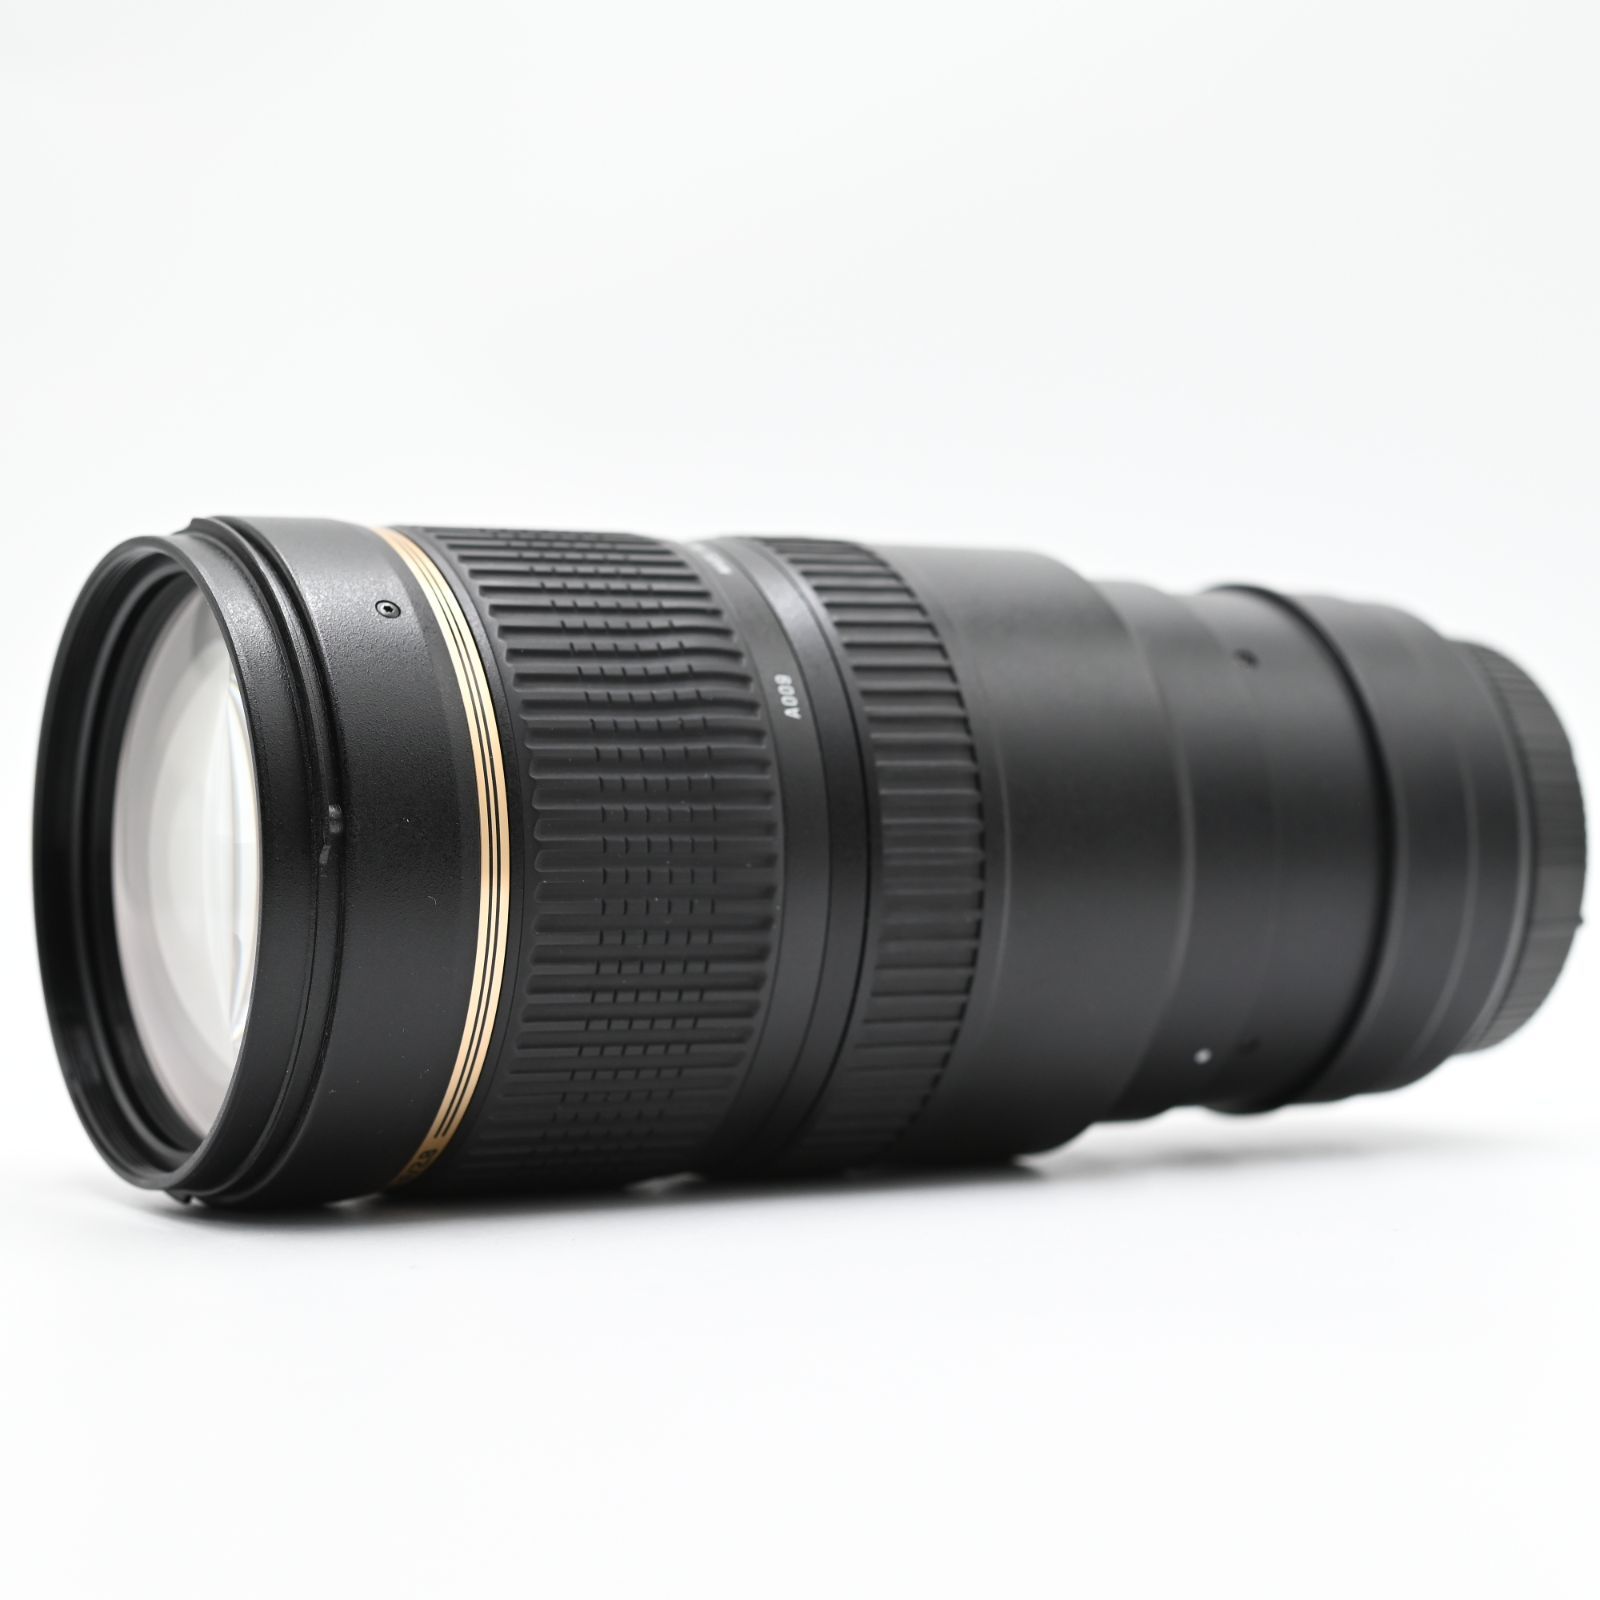 TAMRON 大口径望遠ズームレンズ SP 70-200mm F2.8 Di VC USD ニコン用